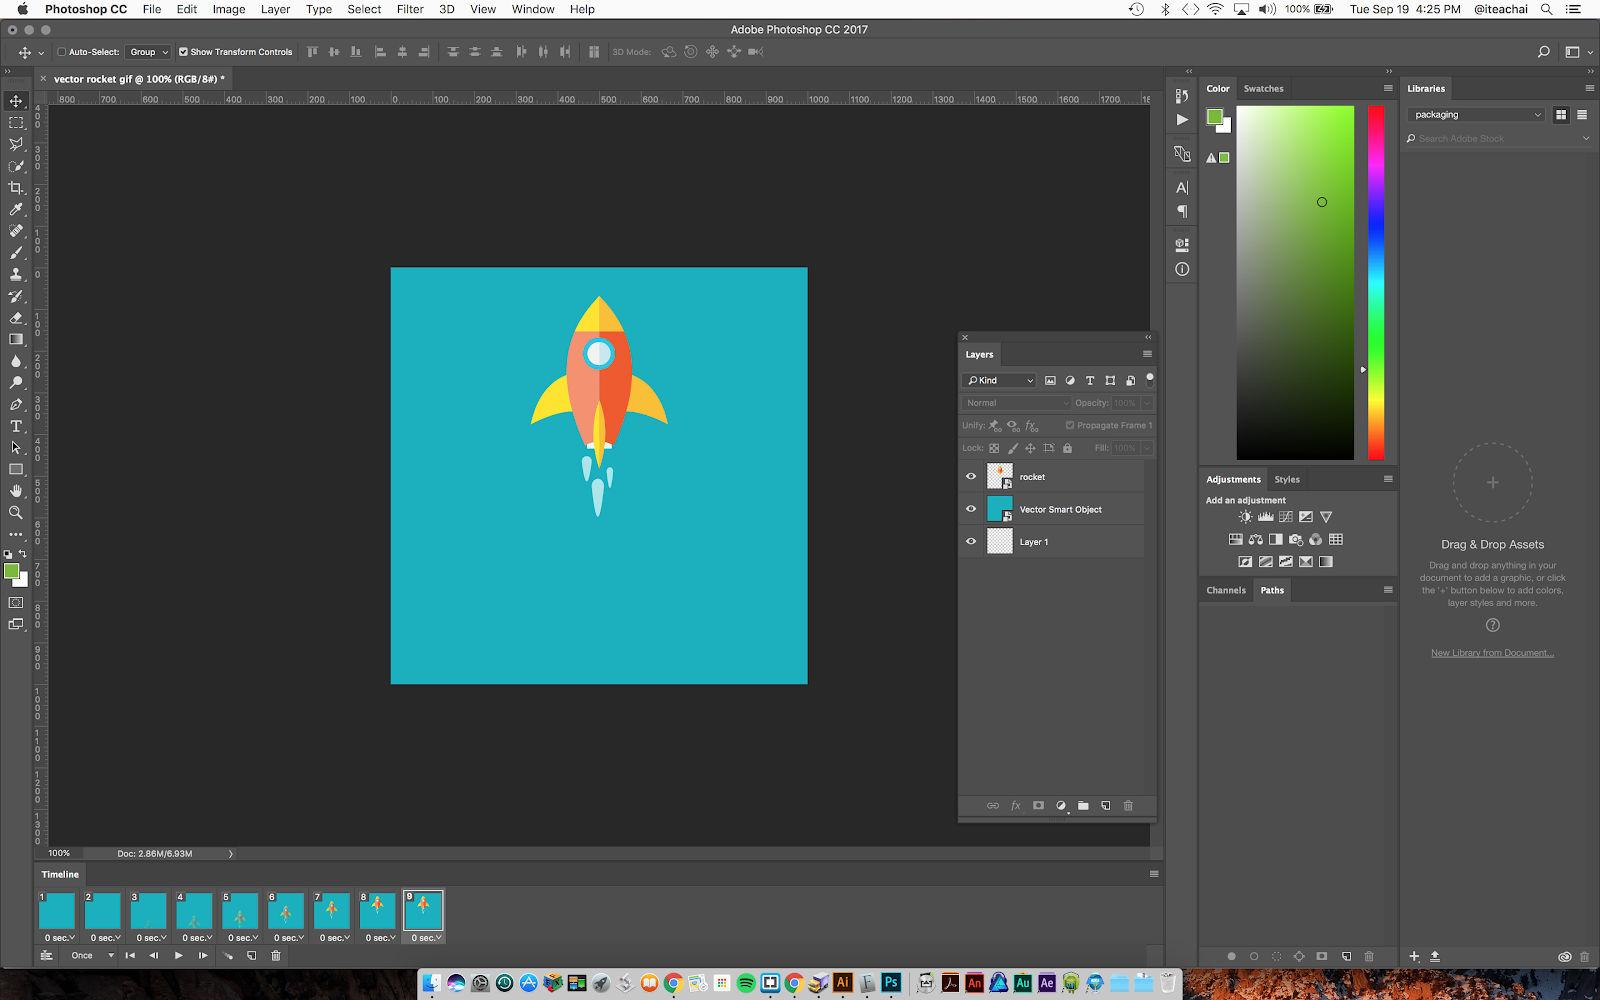 Creating an Animated Gif in Adobe Photoshop – Innovations in